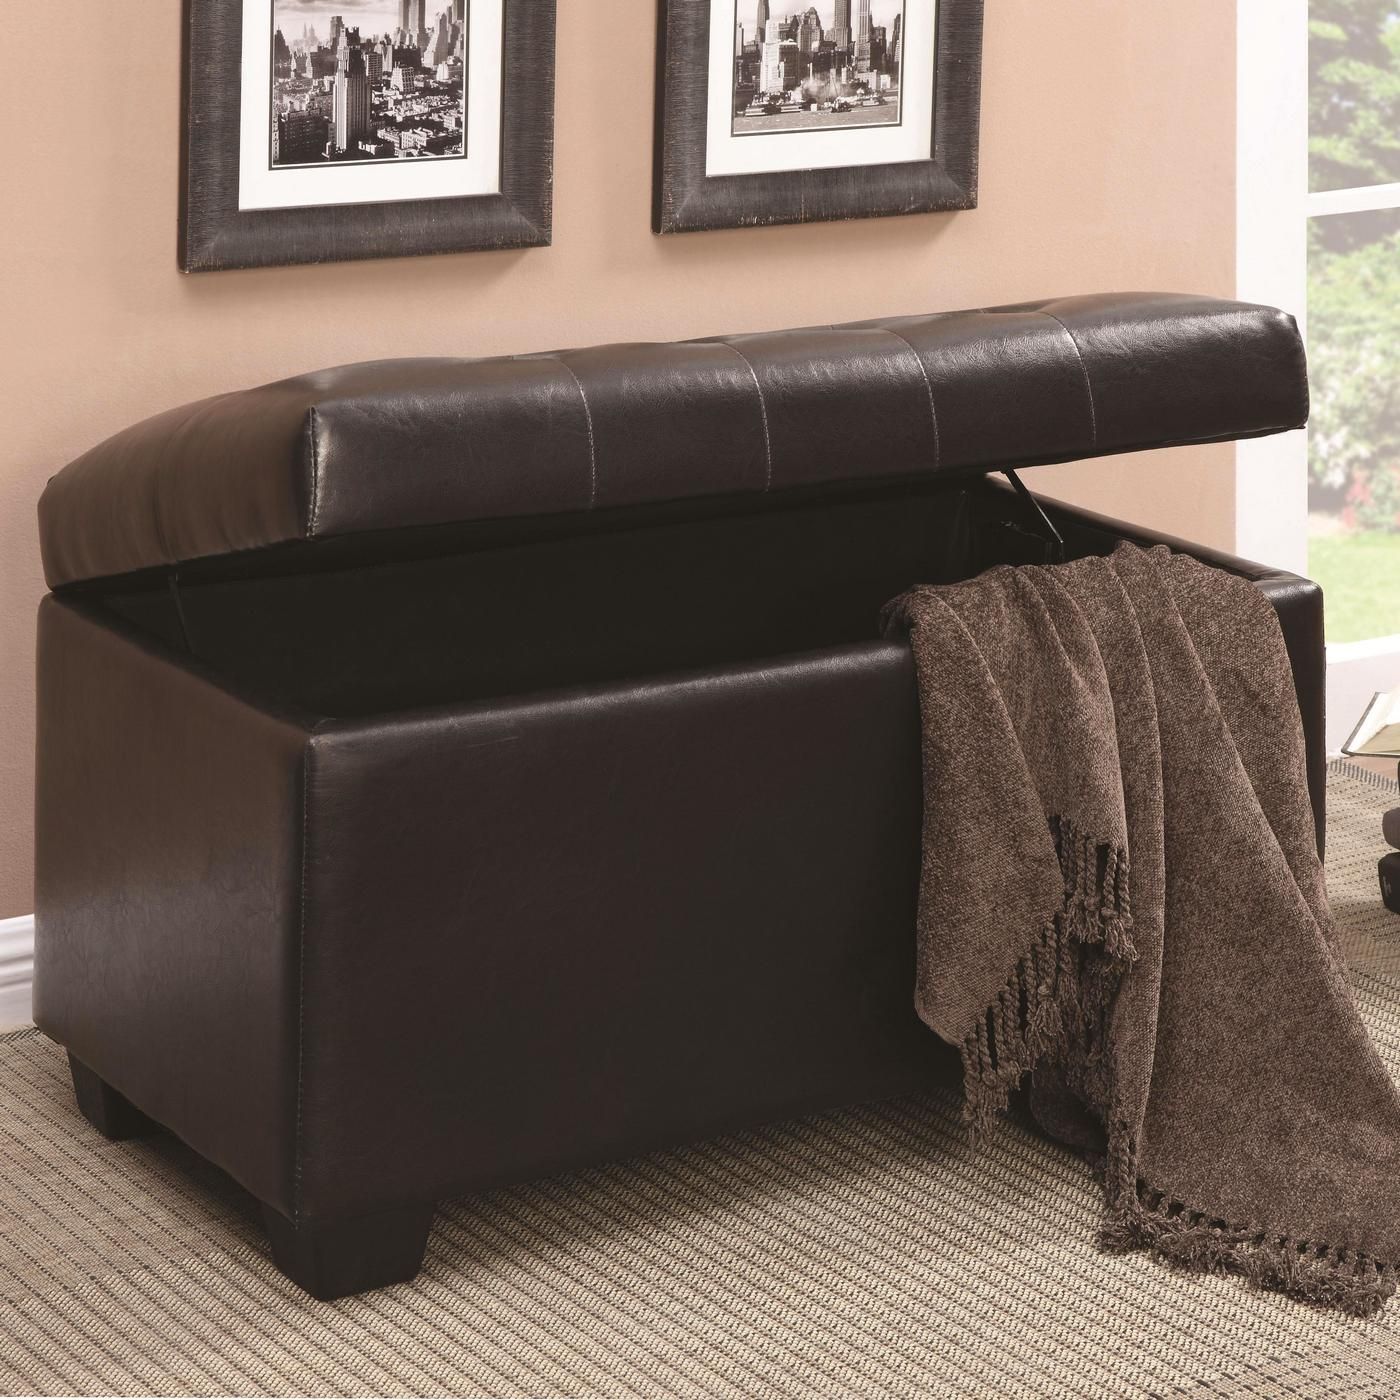 Sturdy Vinyl Upholstered Button Tufted Storage Ottoman Intended For Fabric Tufted Storage Ottomans (View 3 of 20)